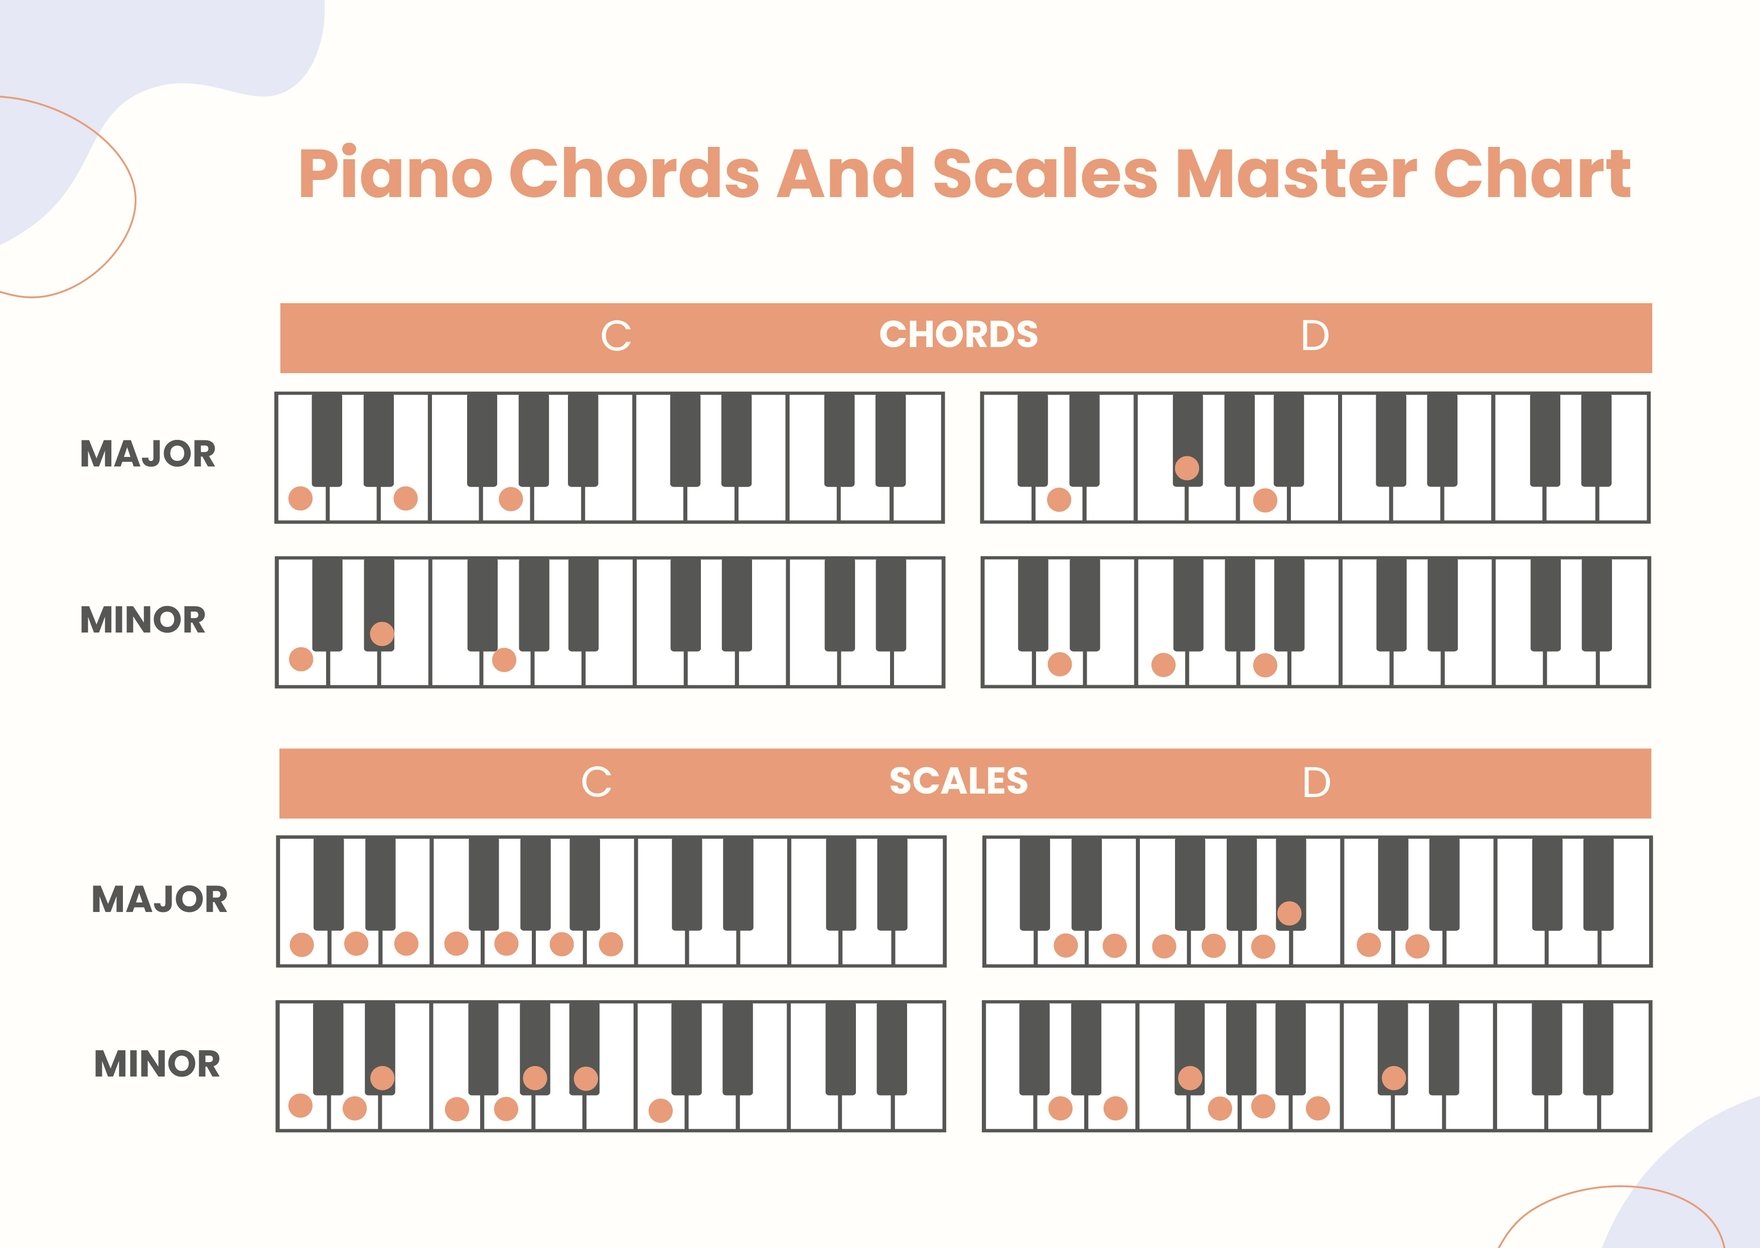 Piano Chords and Scales Master Chart